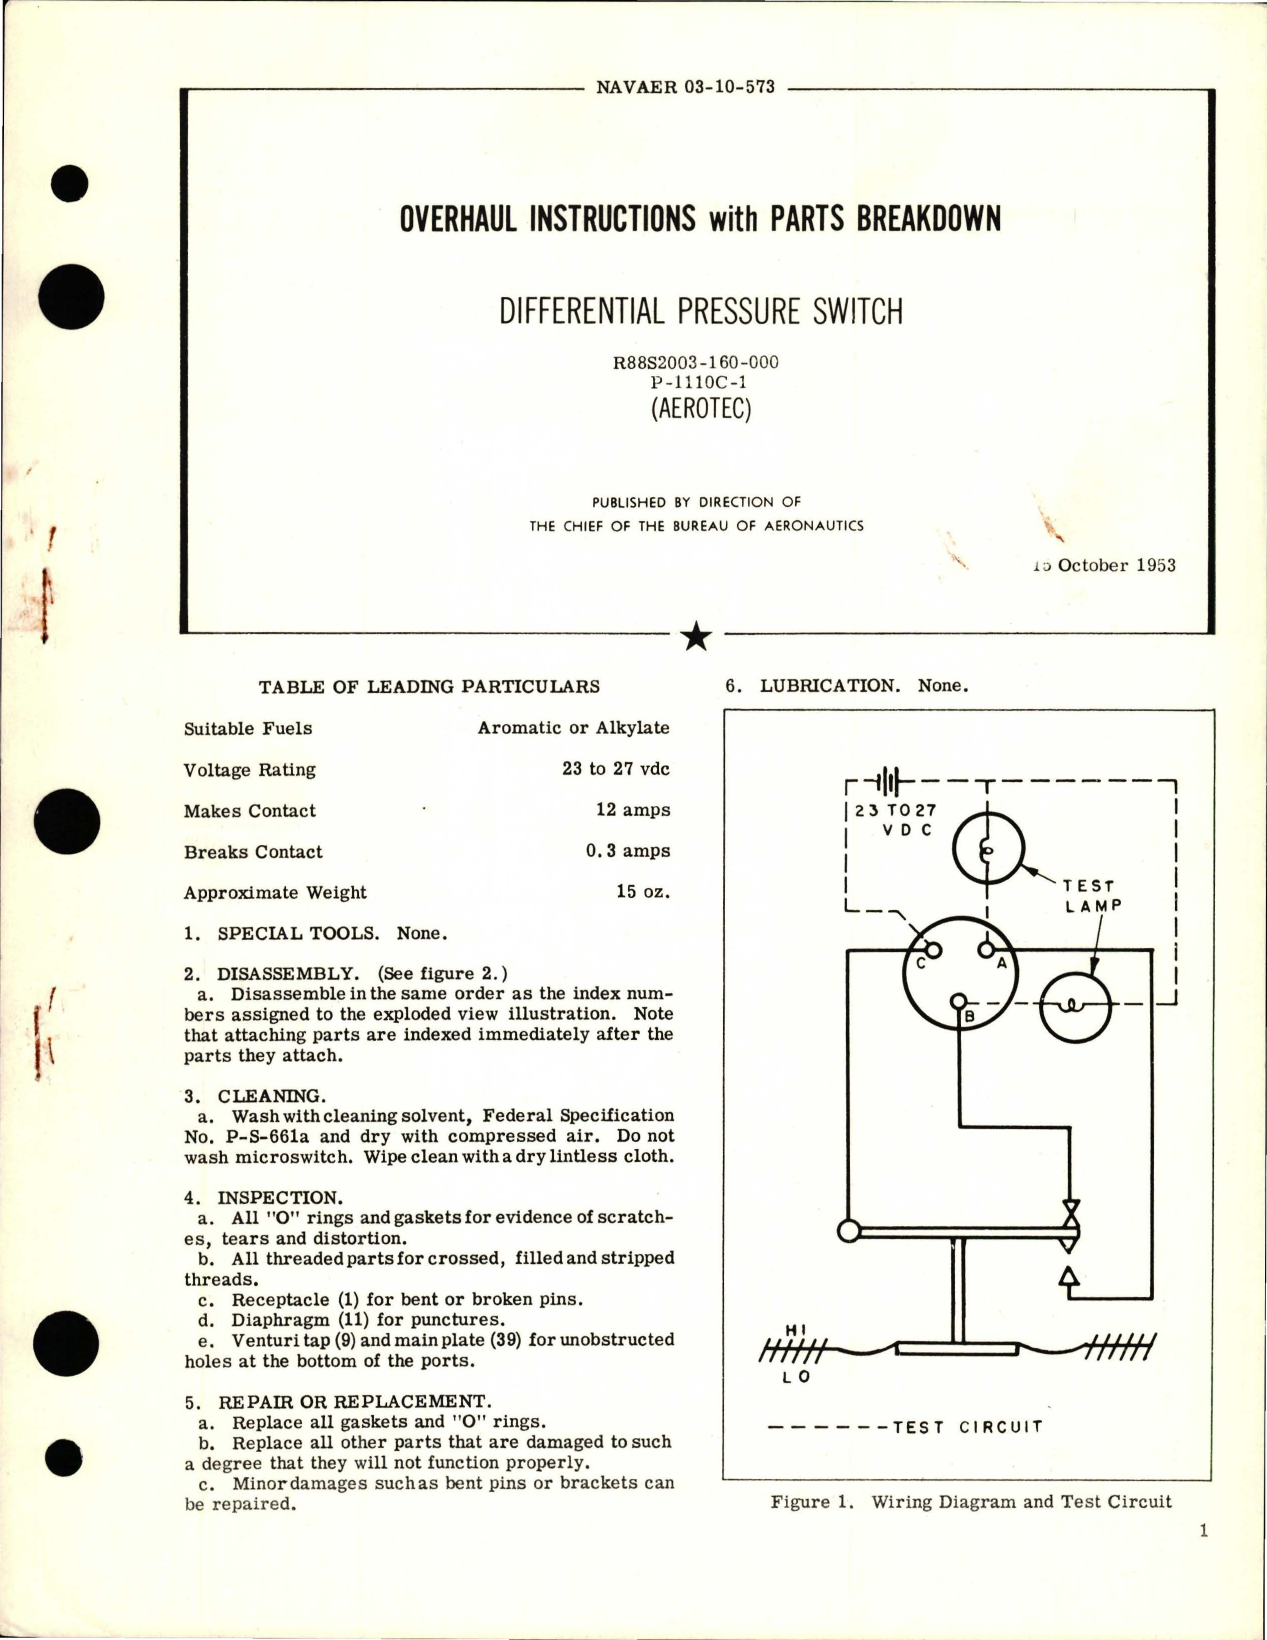 Sample page 1 from AirCorps Library document: Overhaul Instructions with Parts Breakdown for Differential Pressure Switch - P-1110C-1